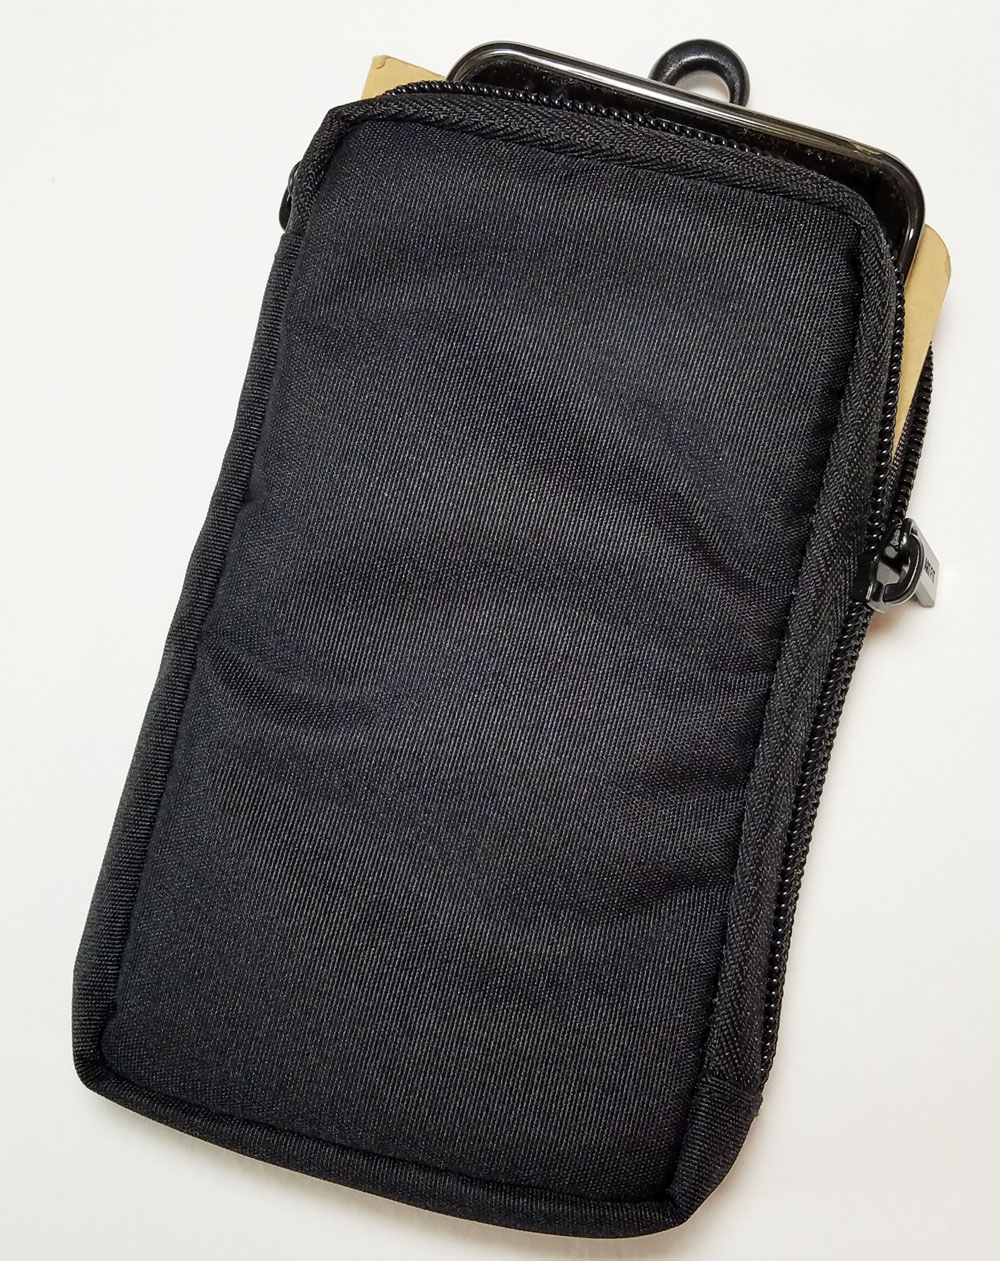 Review: A4 Lihit Lab Teffa Bag-in-Bag - The Well-Appointed Desk